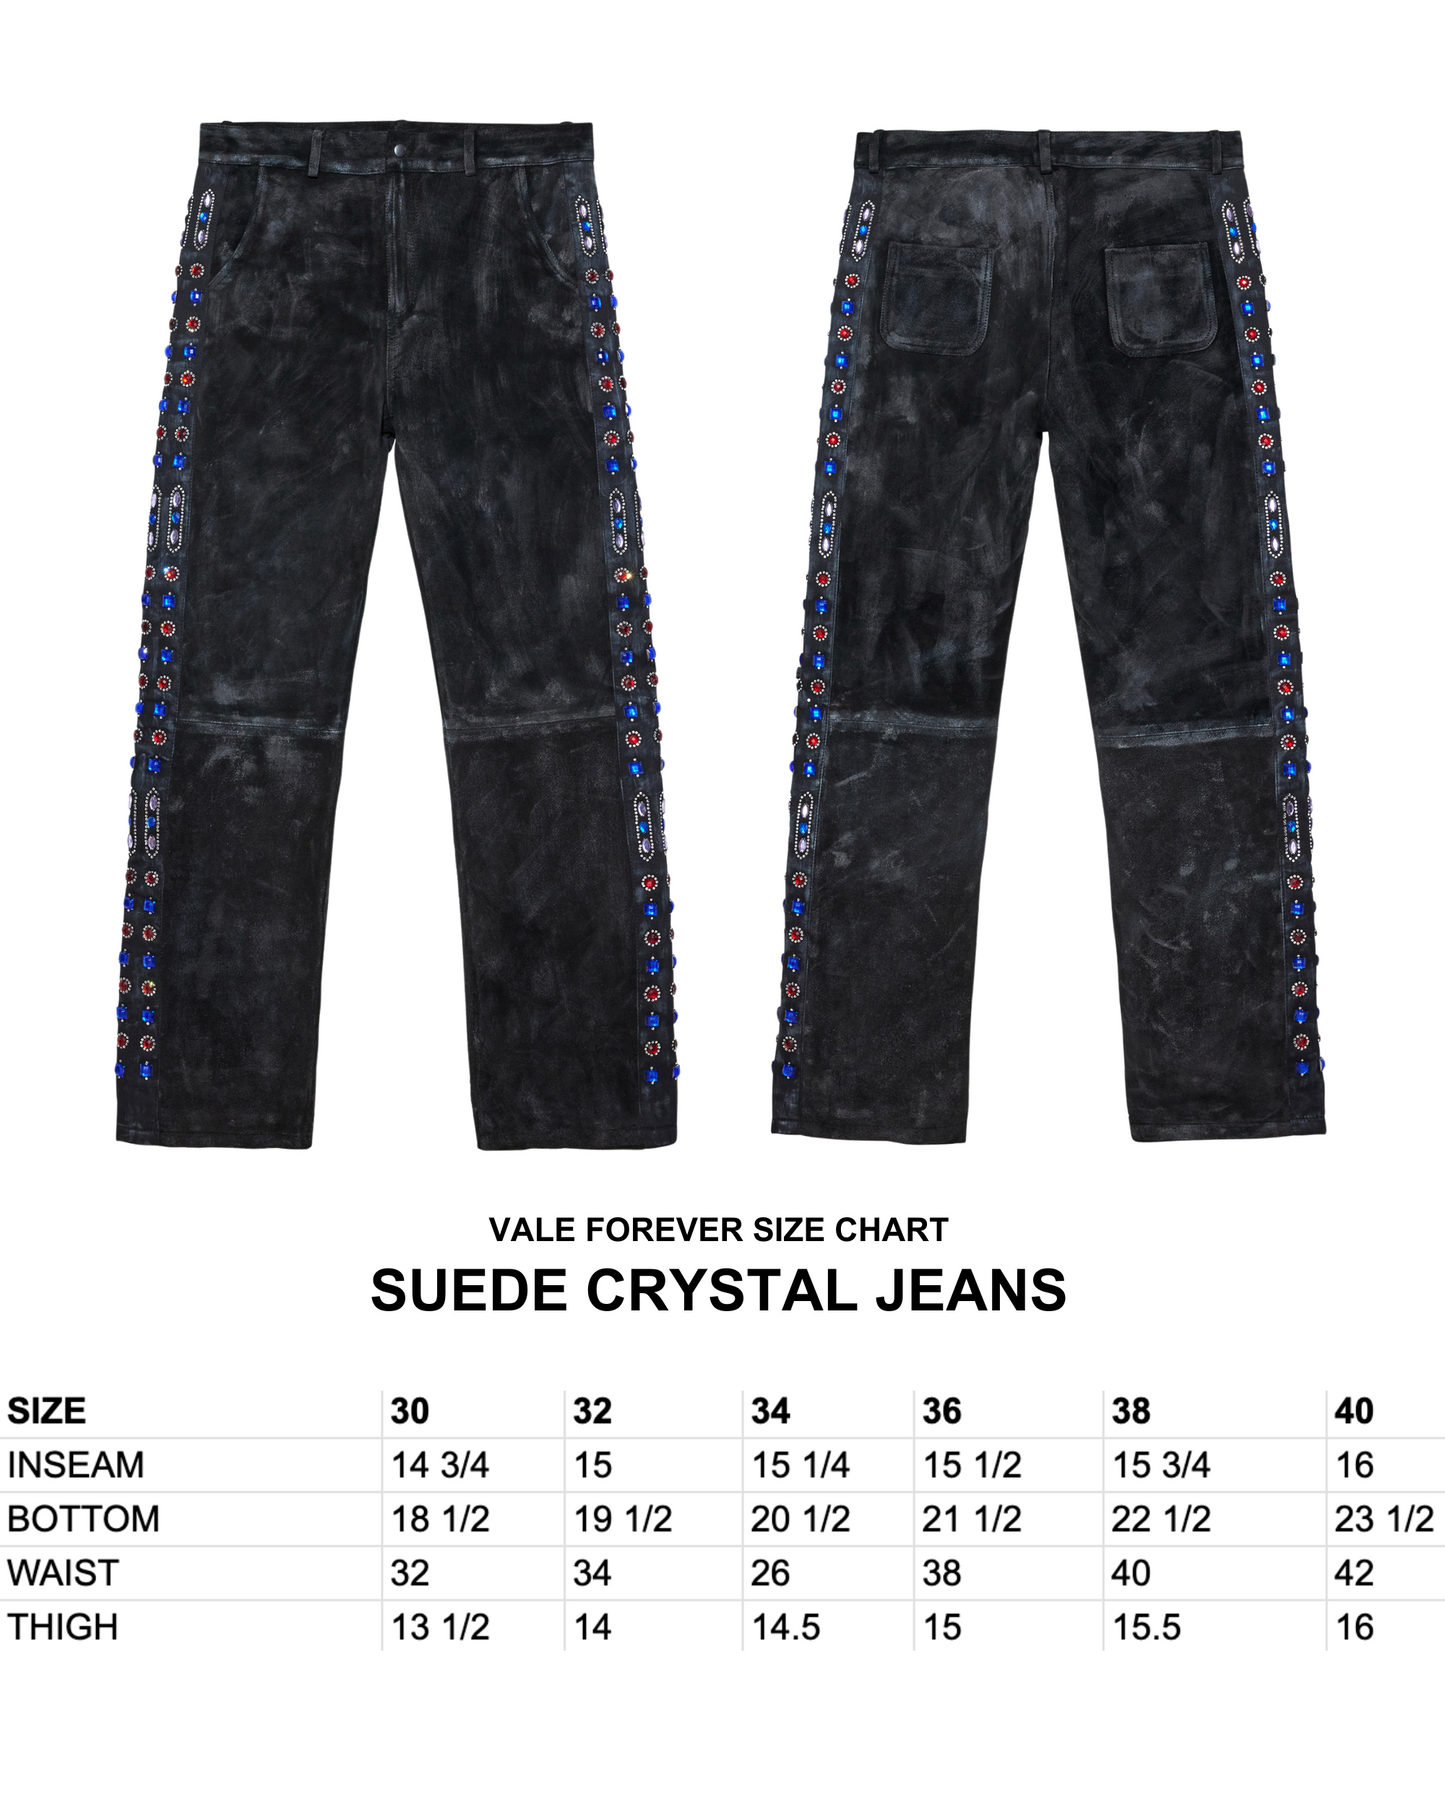 SUEDE CRYSTAL JEANS